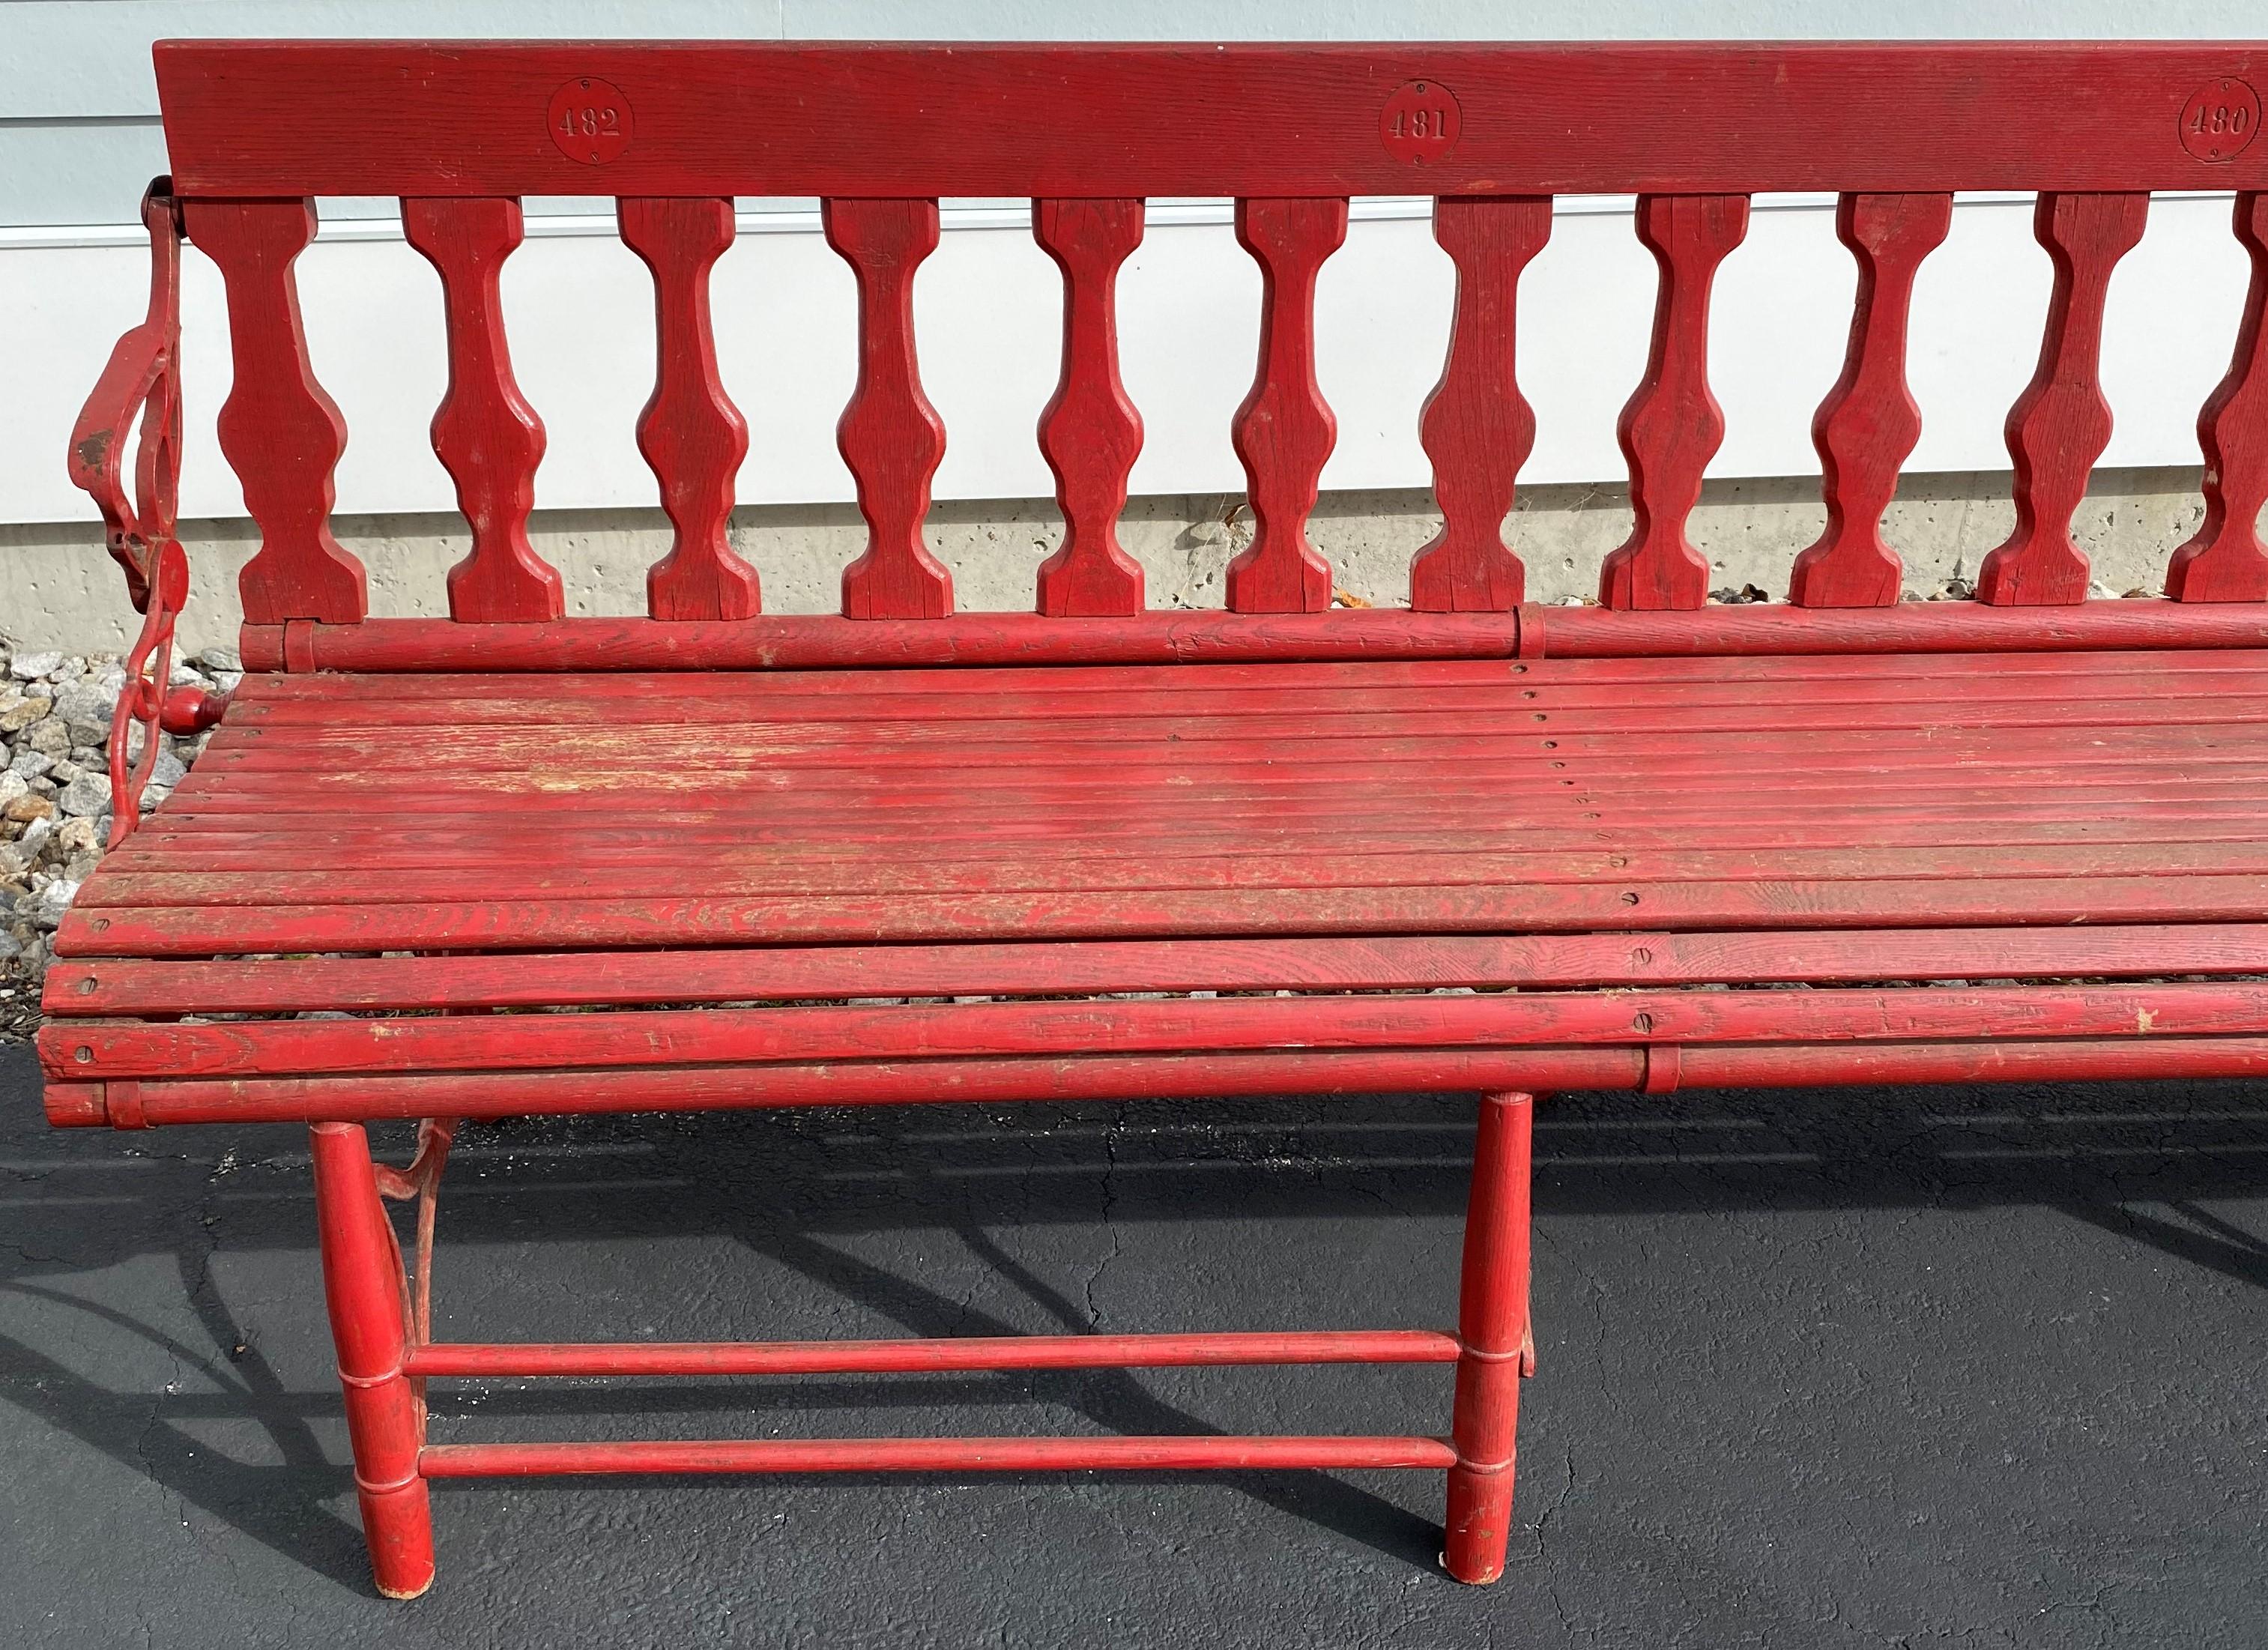 A nice oak folding gymnasium or station bench in red with cast iron hardware that allows the bench to be completely folded and stored when not in use. The back of each seat is numbered, so this was probably used in a gymnasium, auditorium, theater,